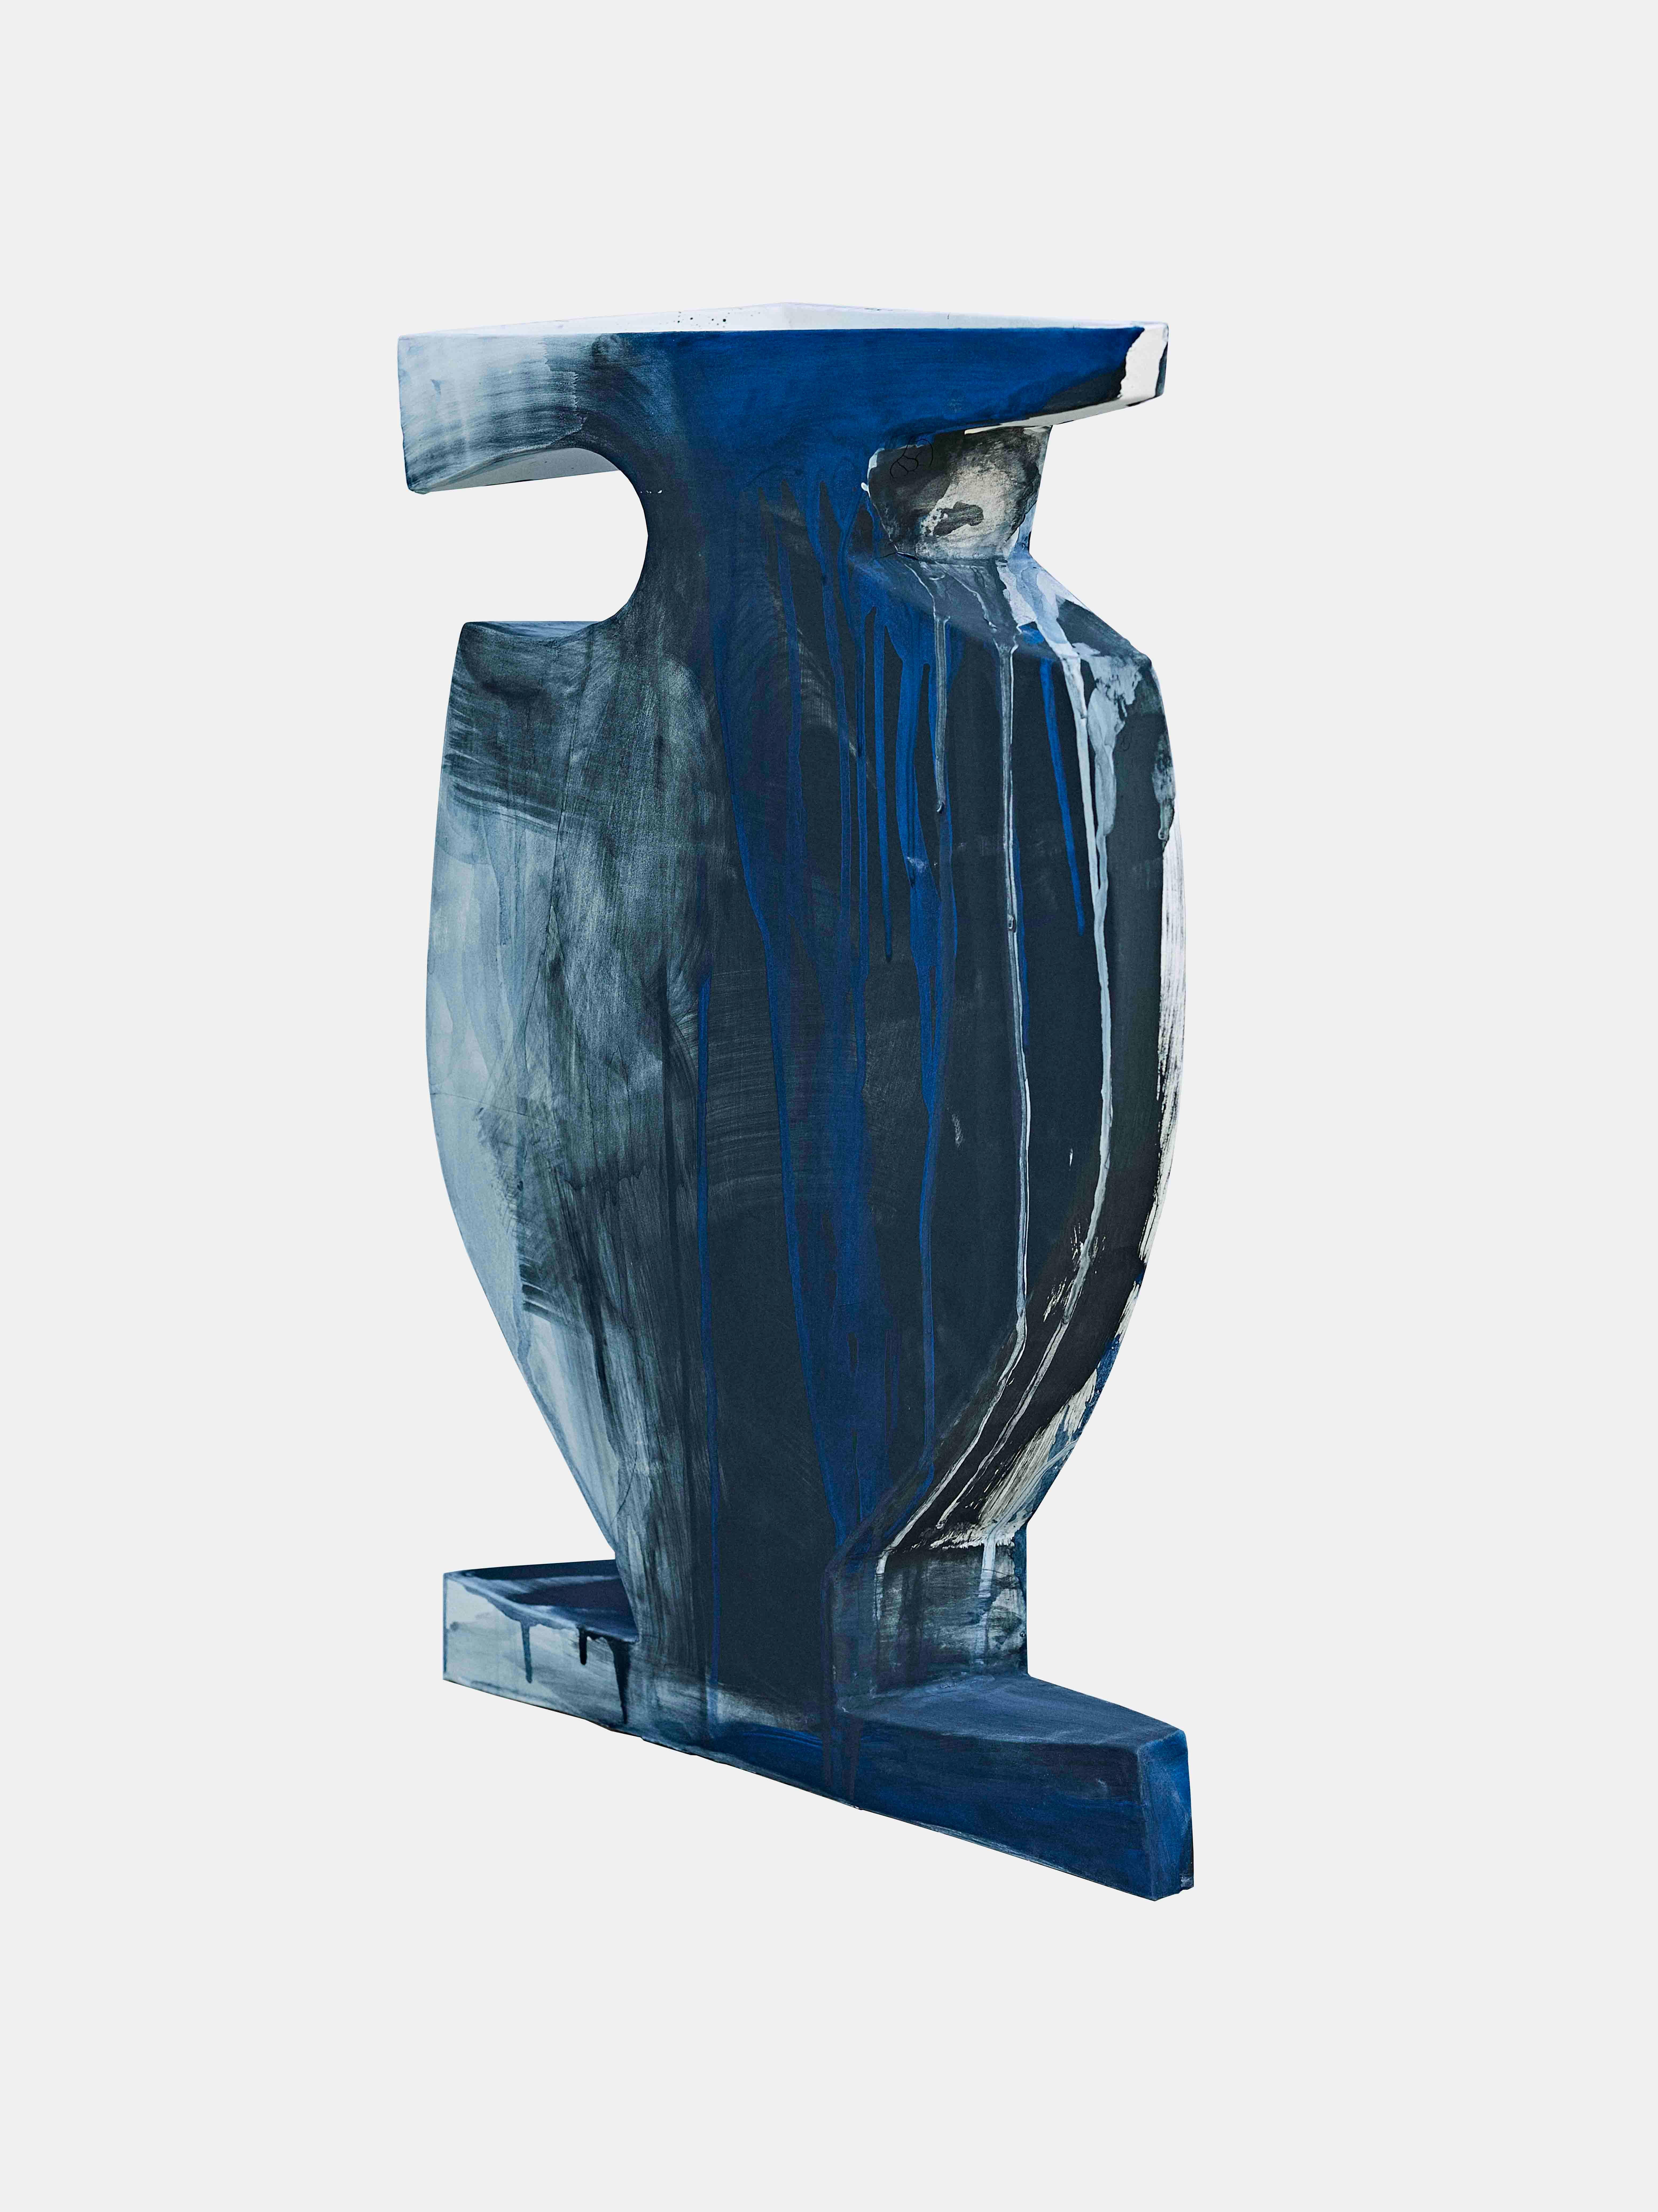 Origine ceramics are one off pieces, designed by the French artist Benjamin Poulanges who is represented by Galerie Negropontes. 

Multi-faceted artist Benjamin Poulanges offers a distinctive vision. His experience is far-ranging, his mind open to